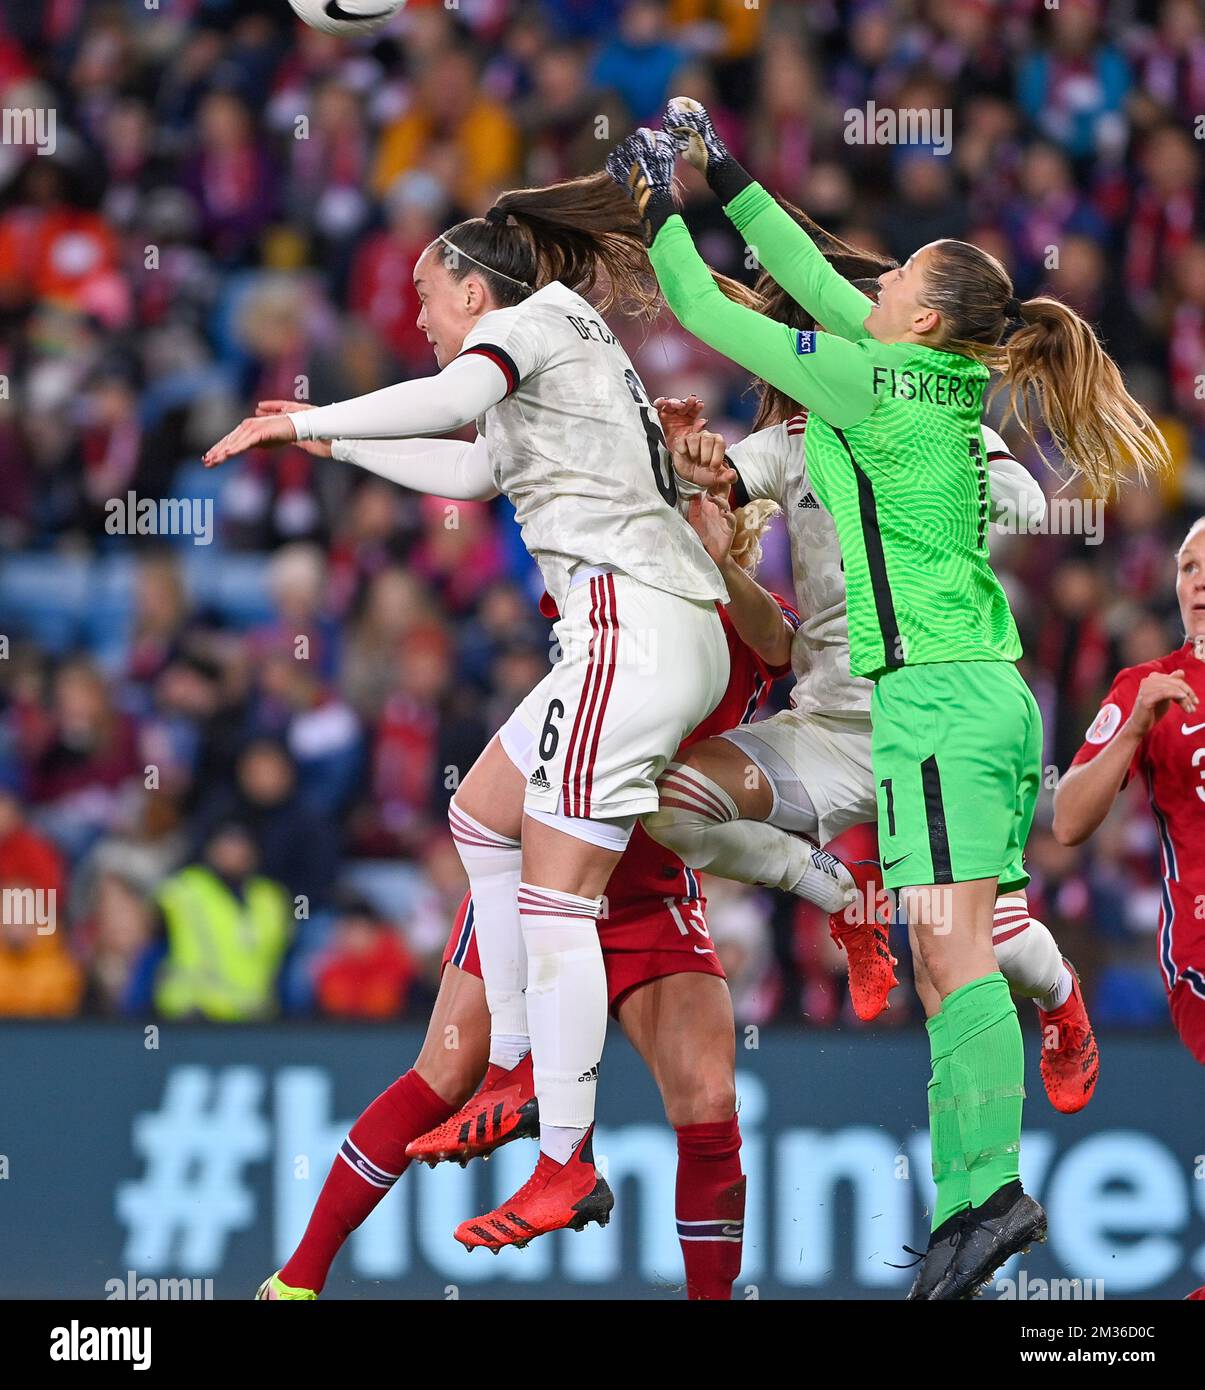 Belgium's Tine De Caigny and Norway's goalkeeper Cecilie Fiskerstrand fight for the ball during a soccer game between Norway and Belgium's national team the Red Flames, Tuesday 26 October 2021 in Oslo, Norway, the fourth game in group F of the qualifications group stage for the 2023 World Cup. BELGA PHOTO DAVID CATRY Stock Photo